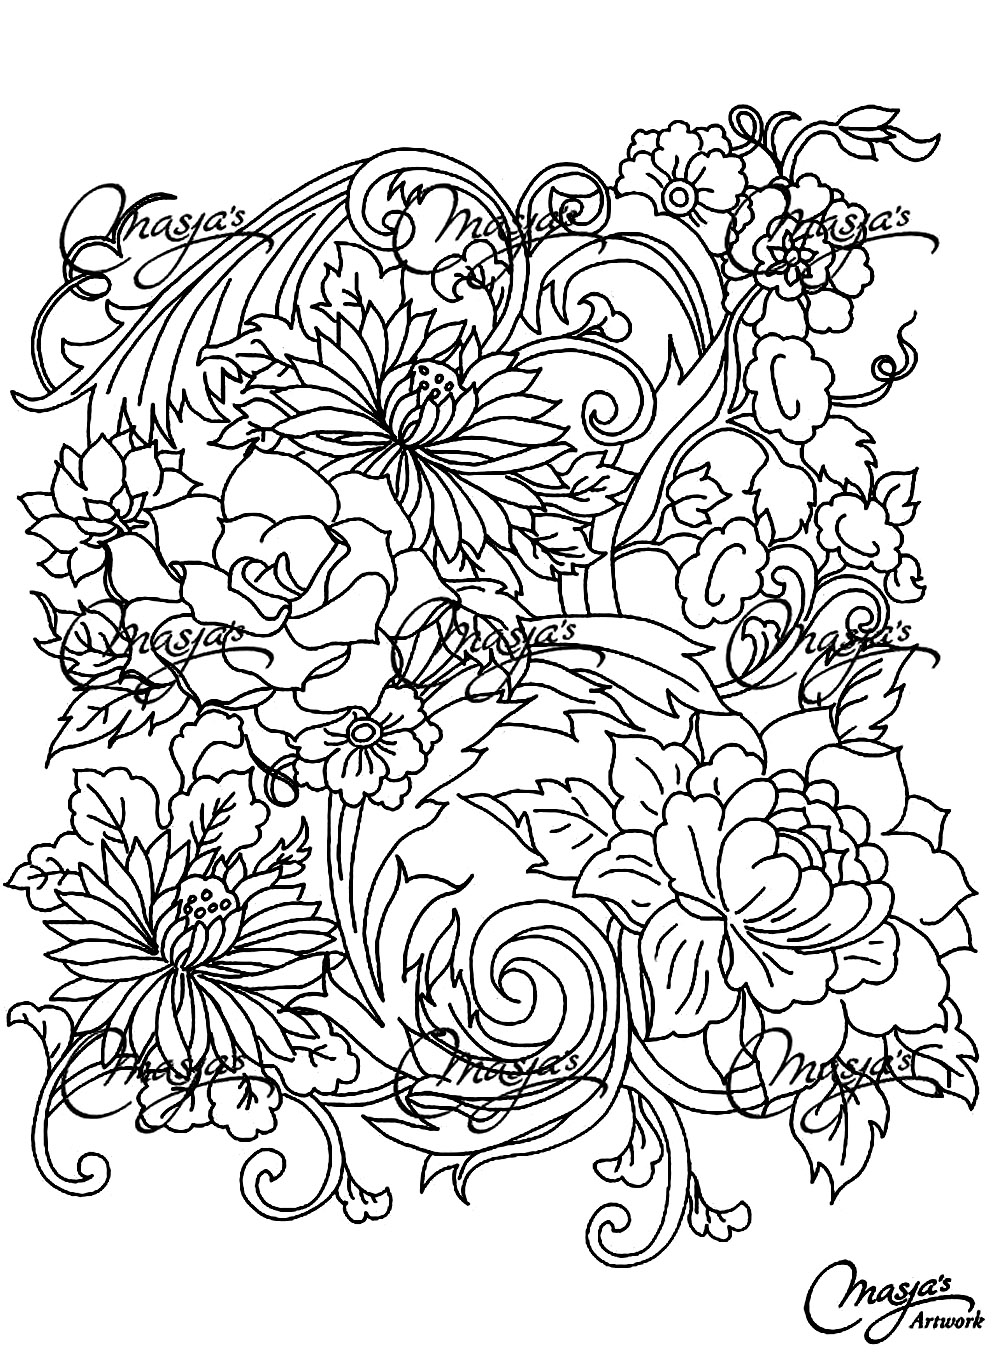 Flowers drawing